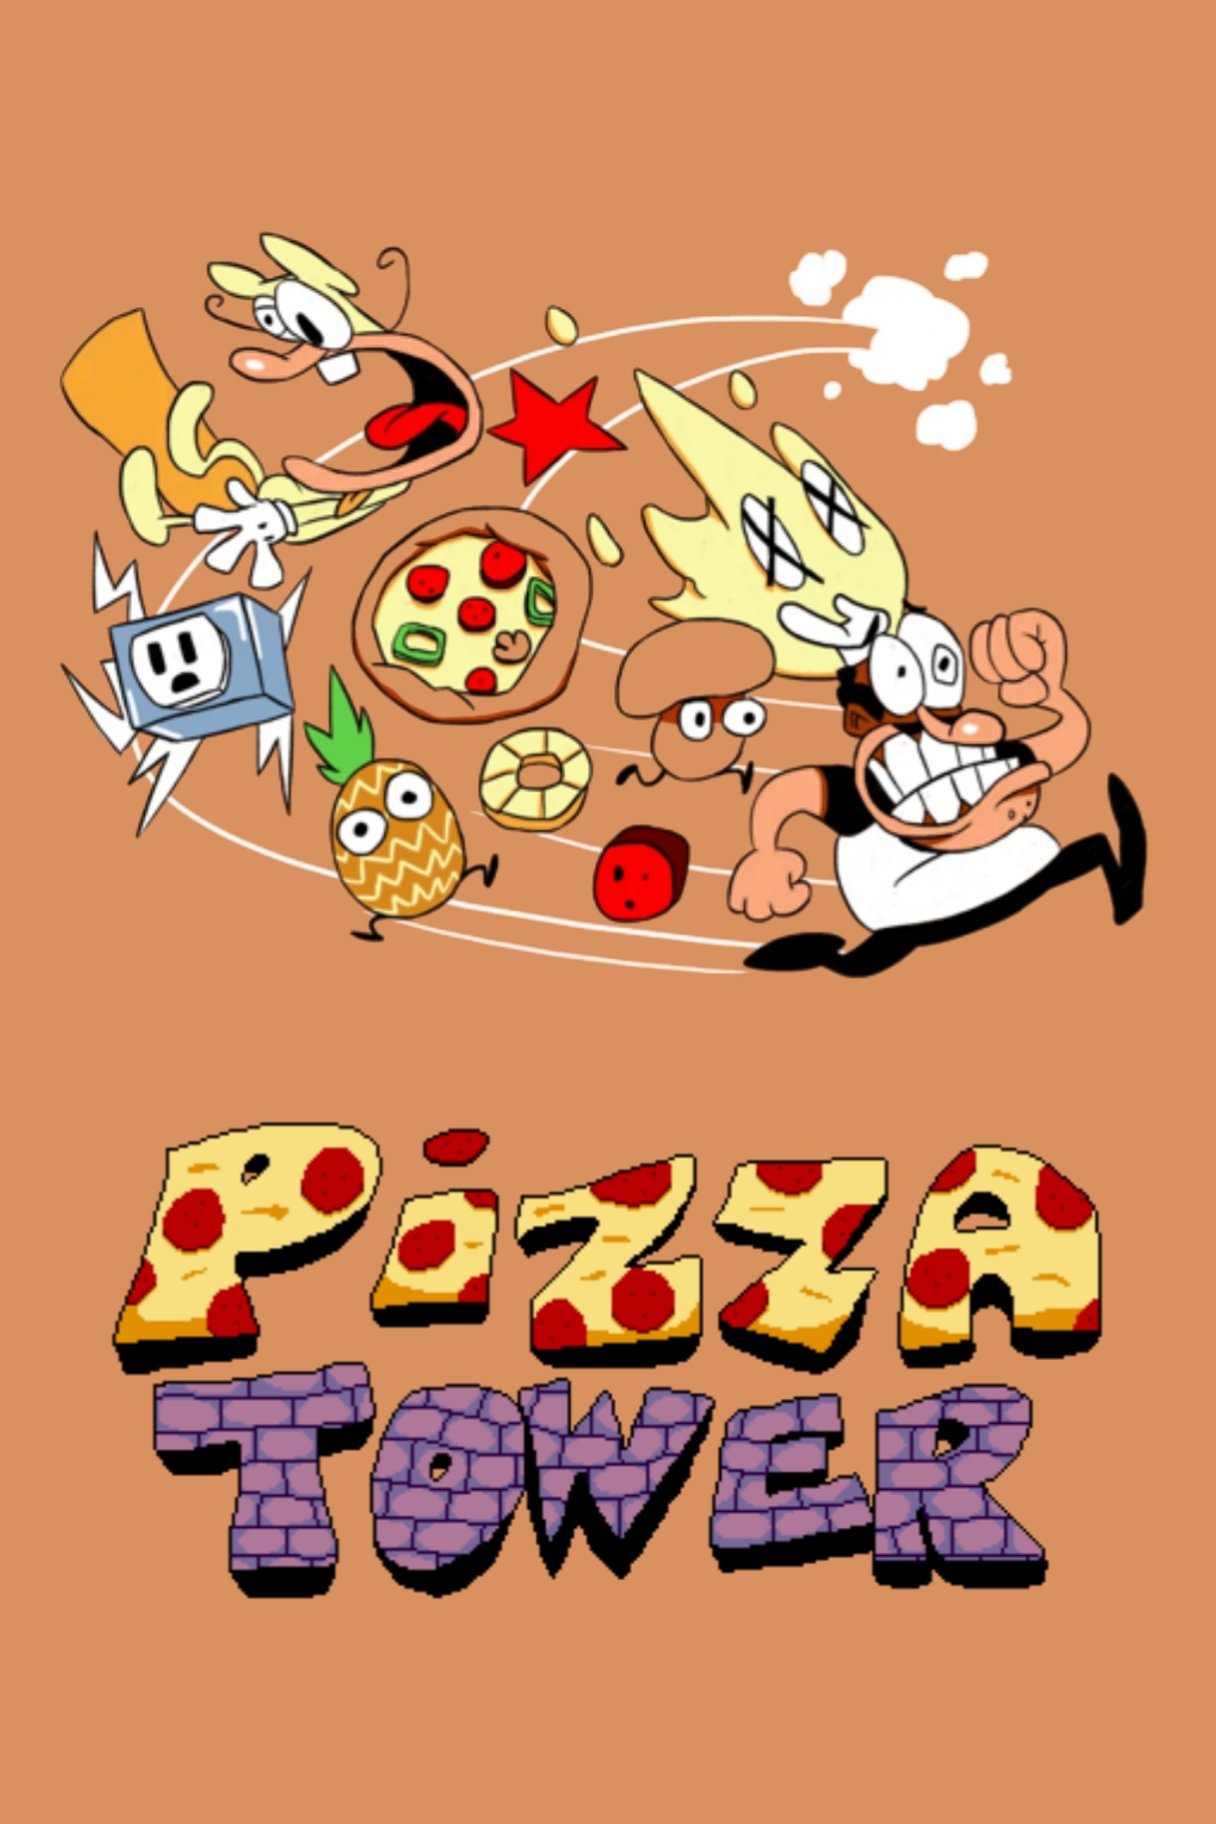 Latest Pizza Tower : Online Game News and Guides